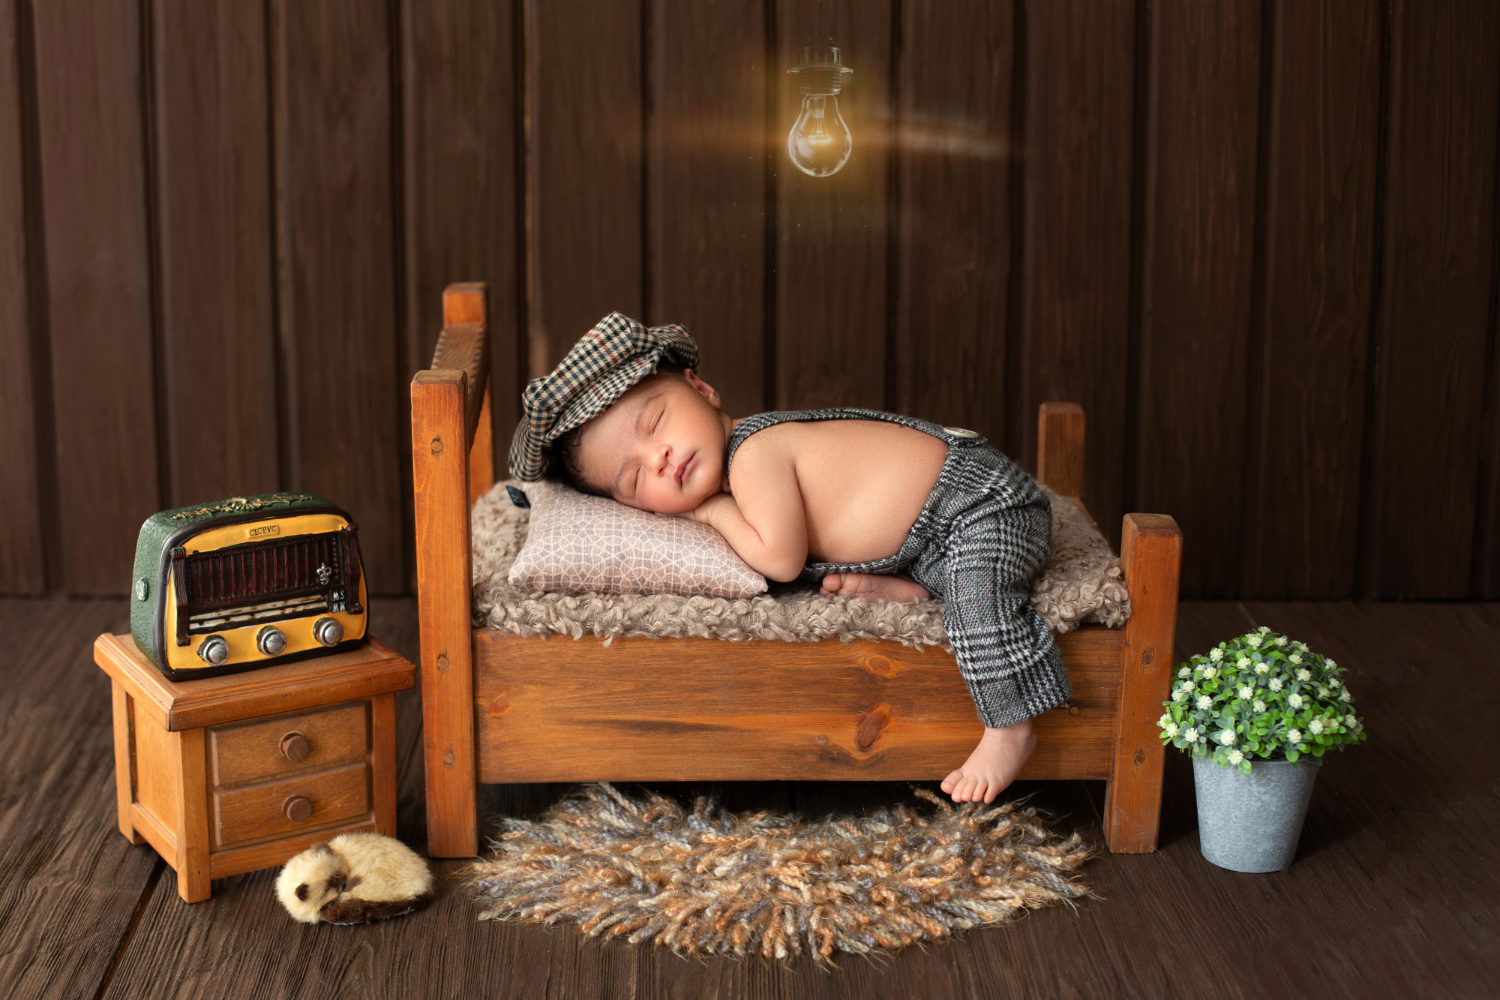 Baby in vintage attire, capturing timeless charm and nostalgia.